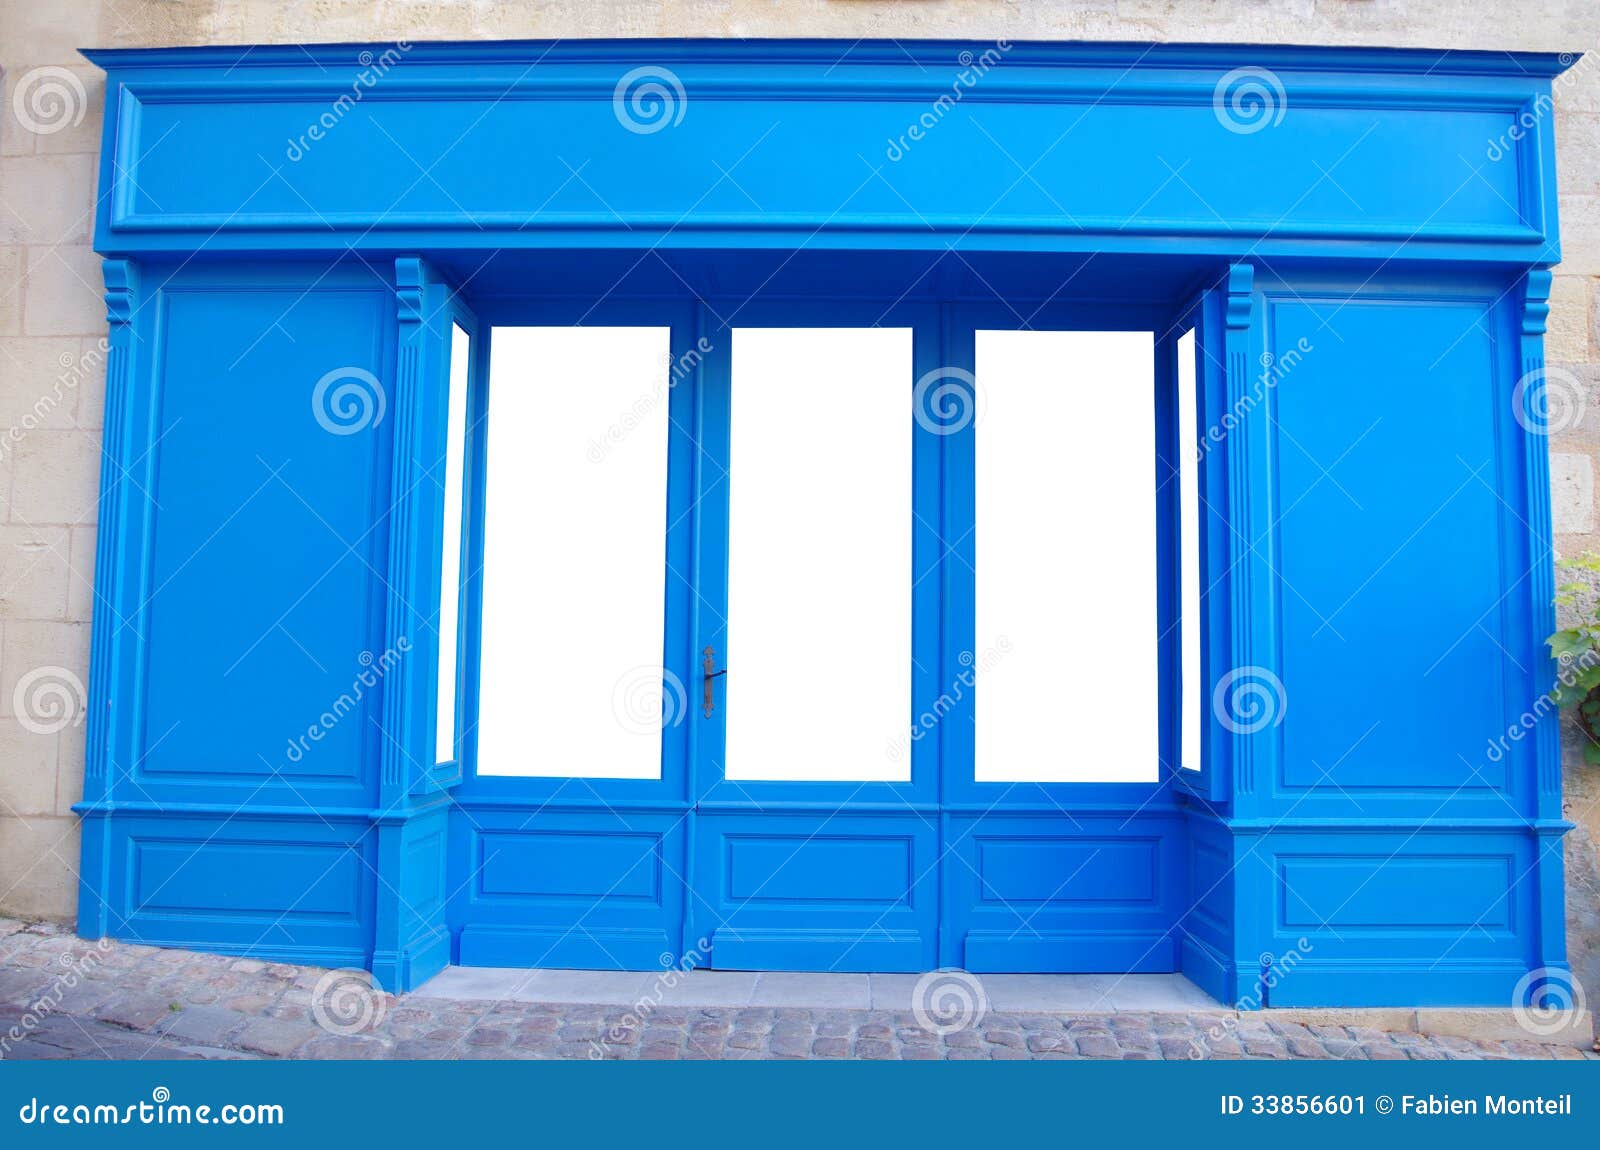 Storefront, Shop, Façade, Blank Generic Store Front Stock Image 